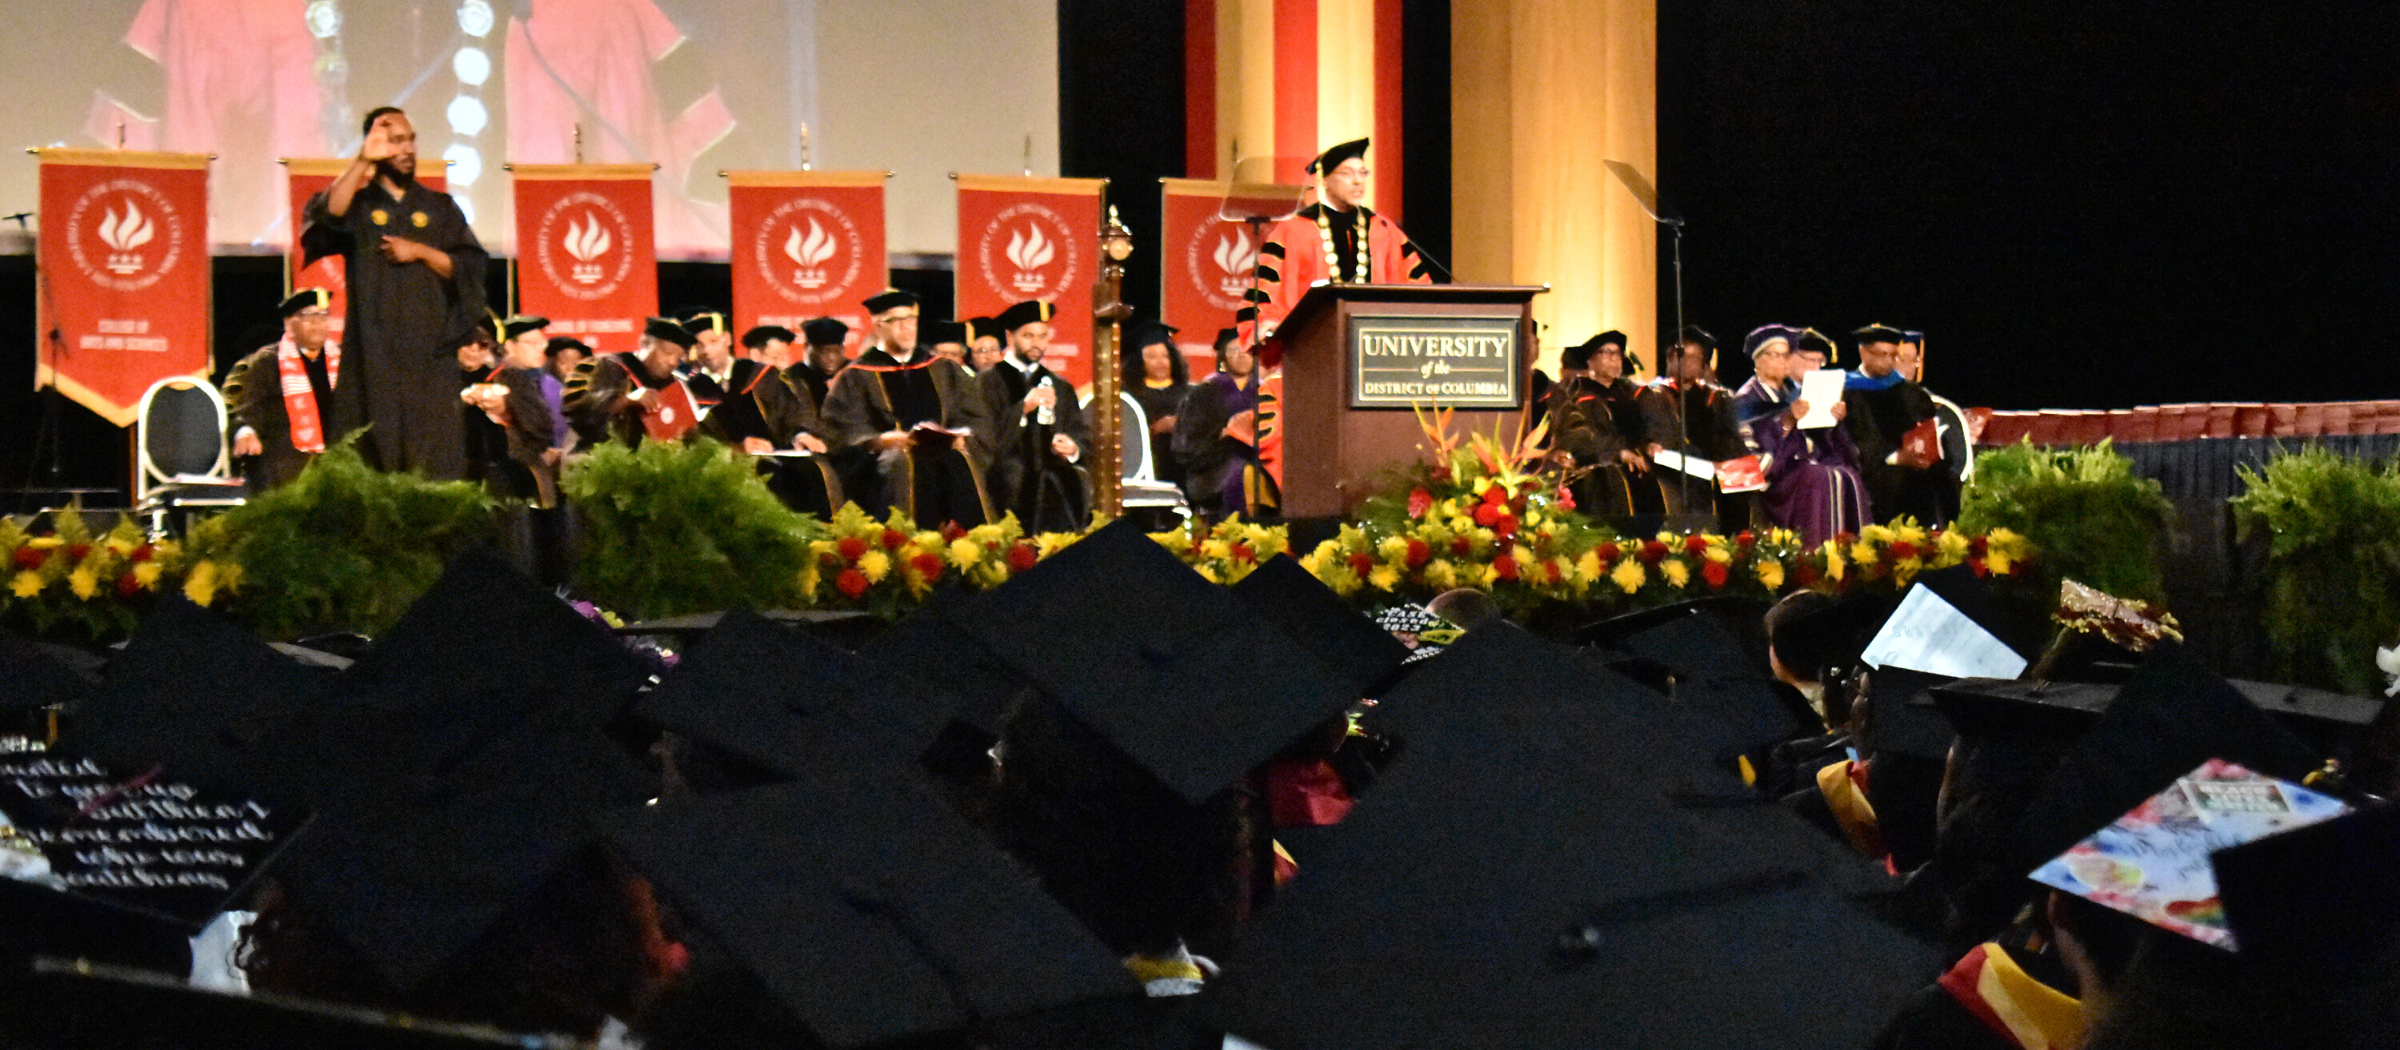 Historic ceremony acknowledges graduates, including first Ph.D. students and longest-serving president